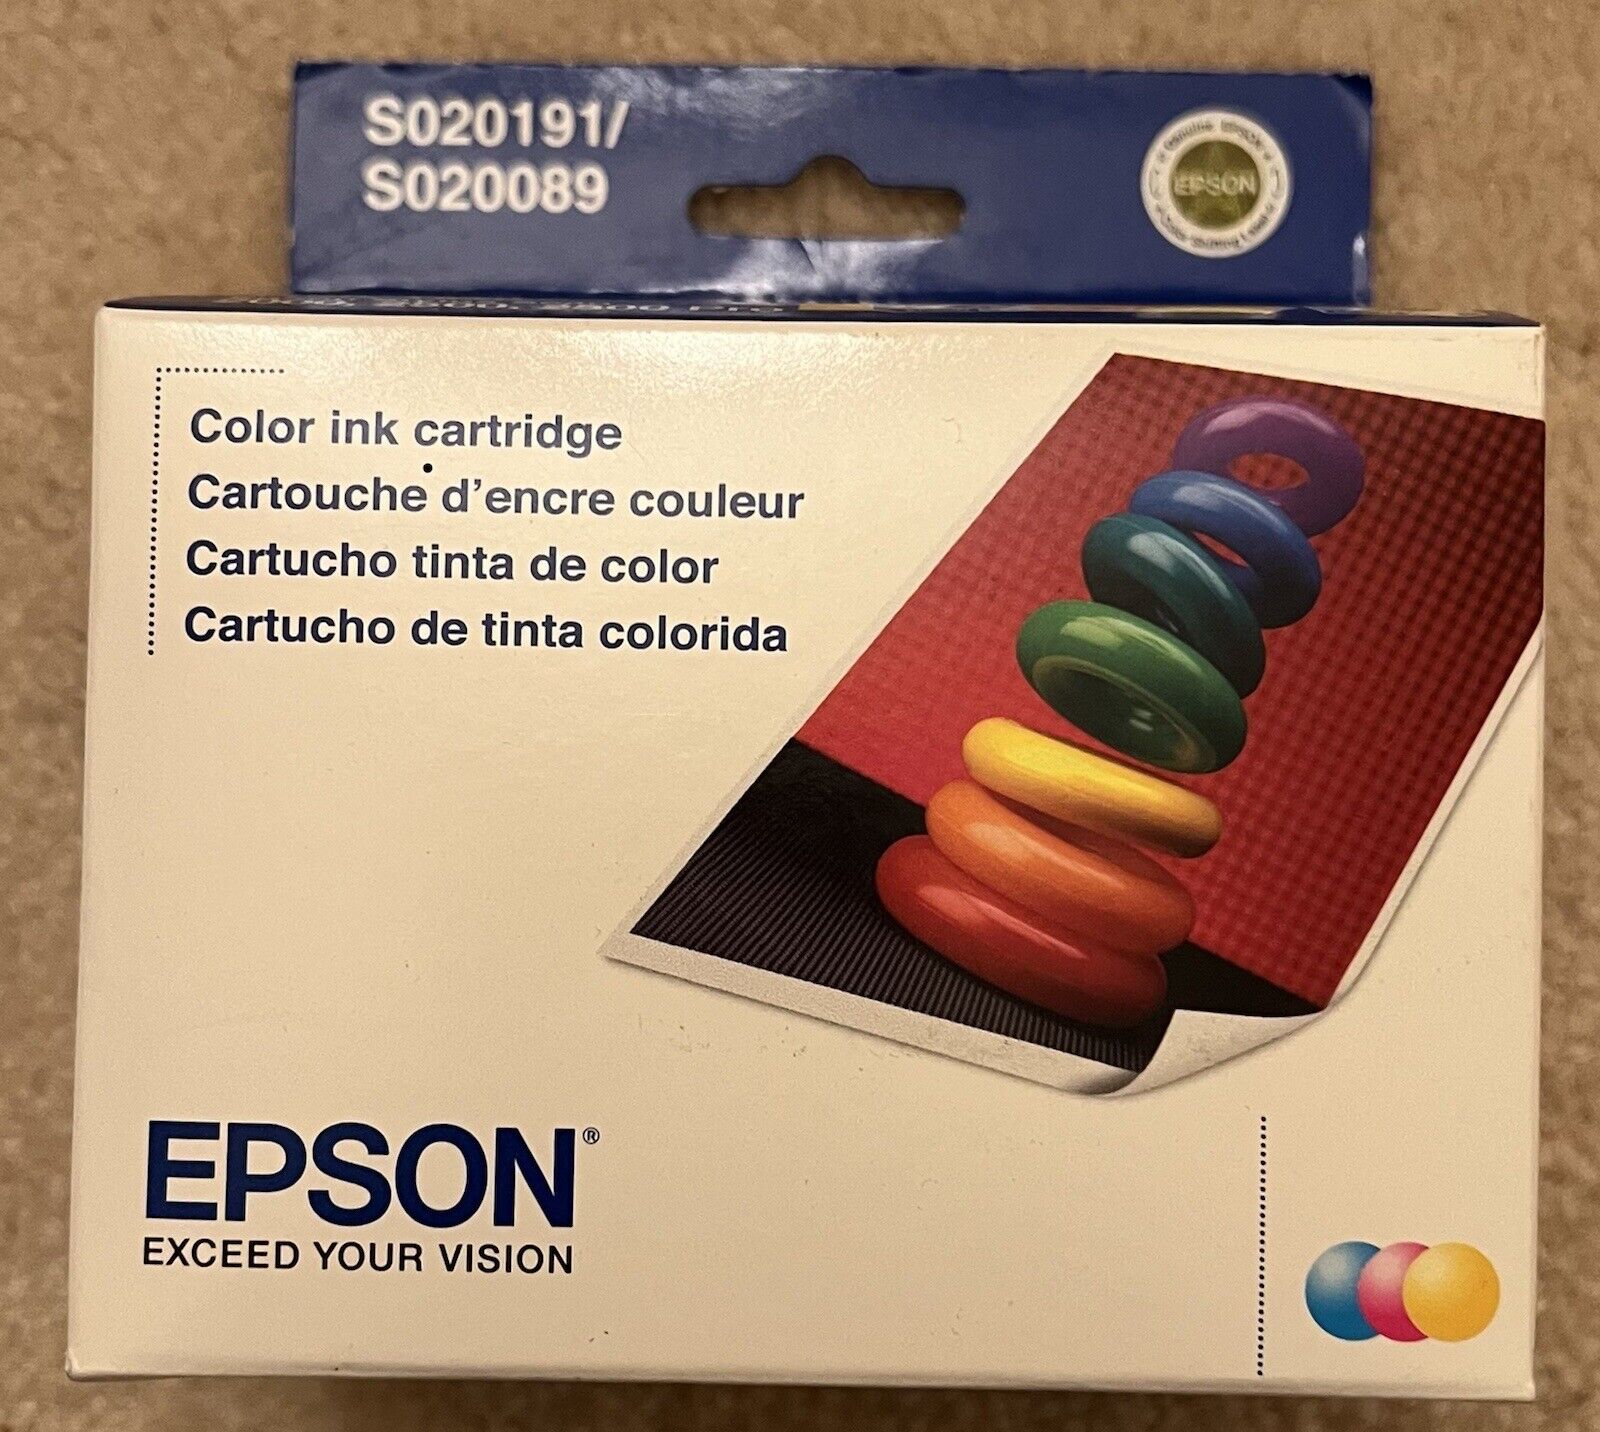 NEW Epson S020191/S020089 Color Ink Cartridge Stylus 400 600 2000 2500 Oct2007